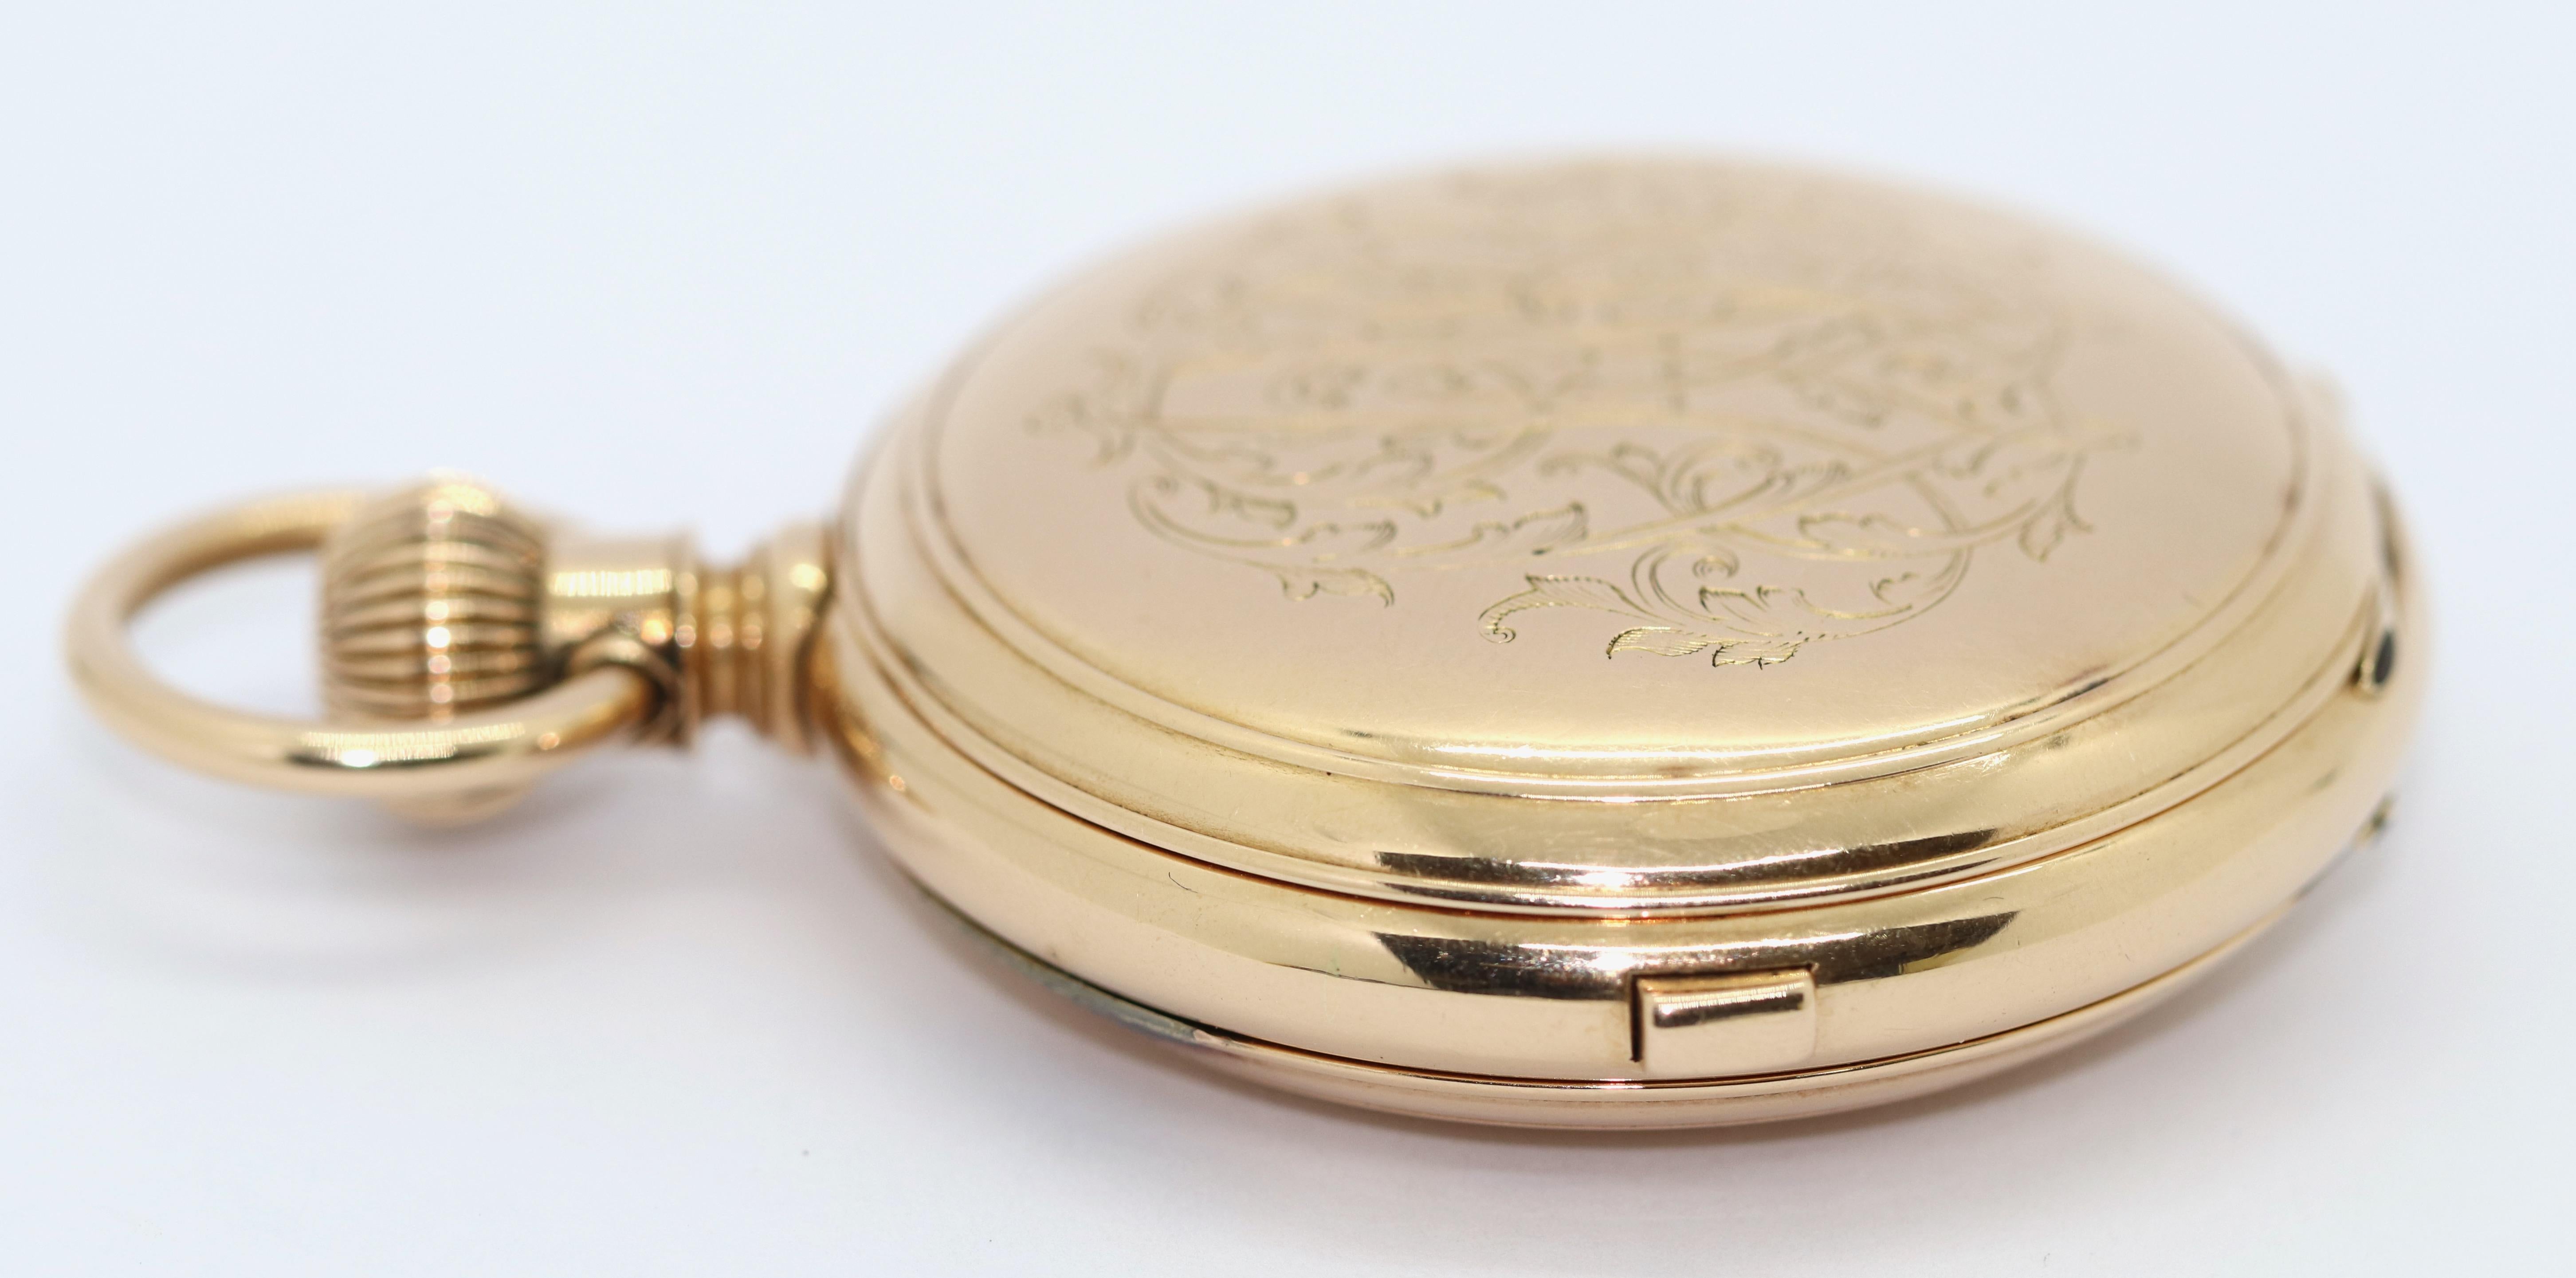 14K Gold Pocket Hunter Watch by American Watch Co. Waltham, Chronograph Repeater For Sale 5